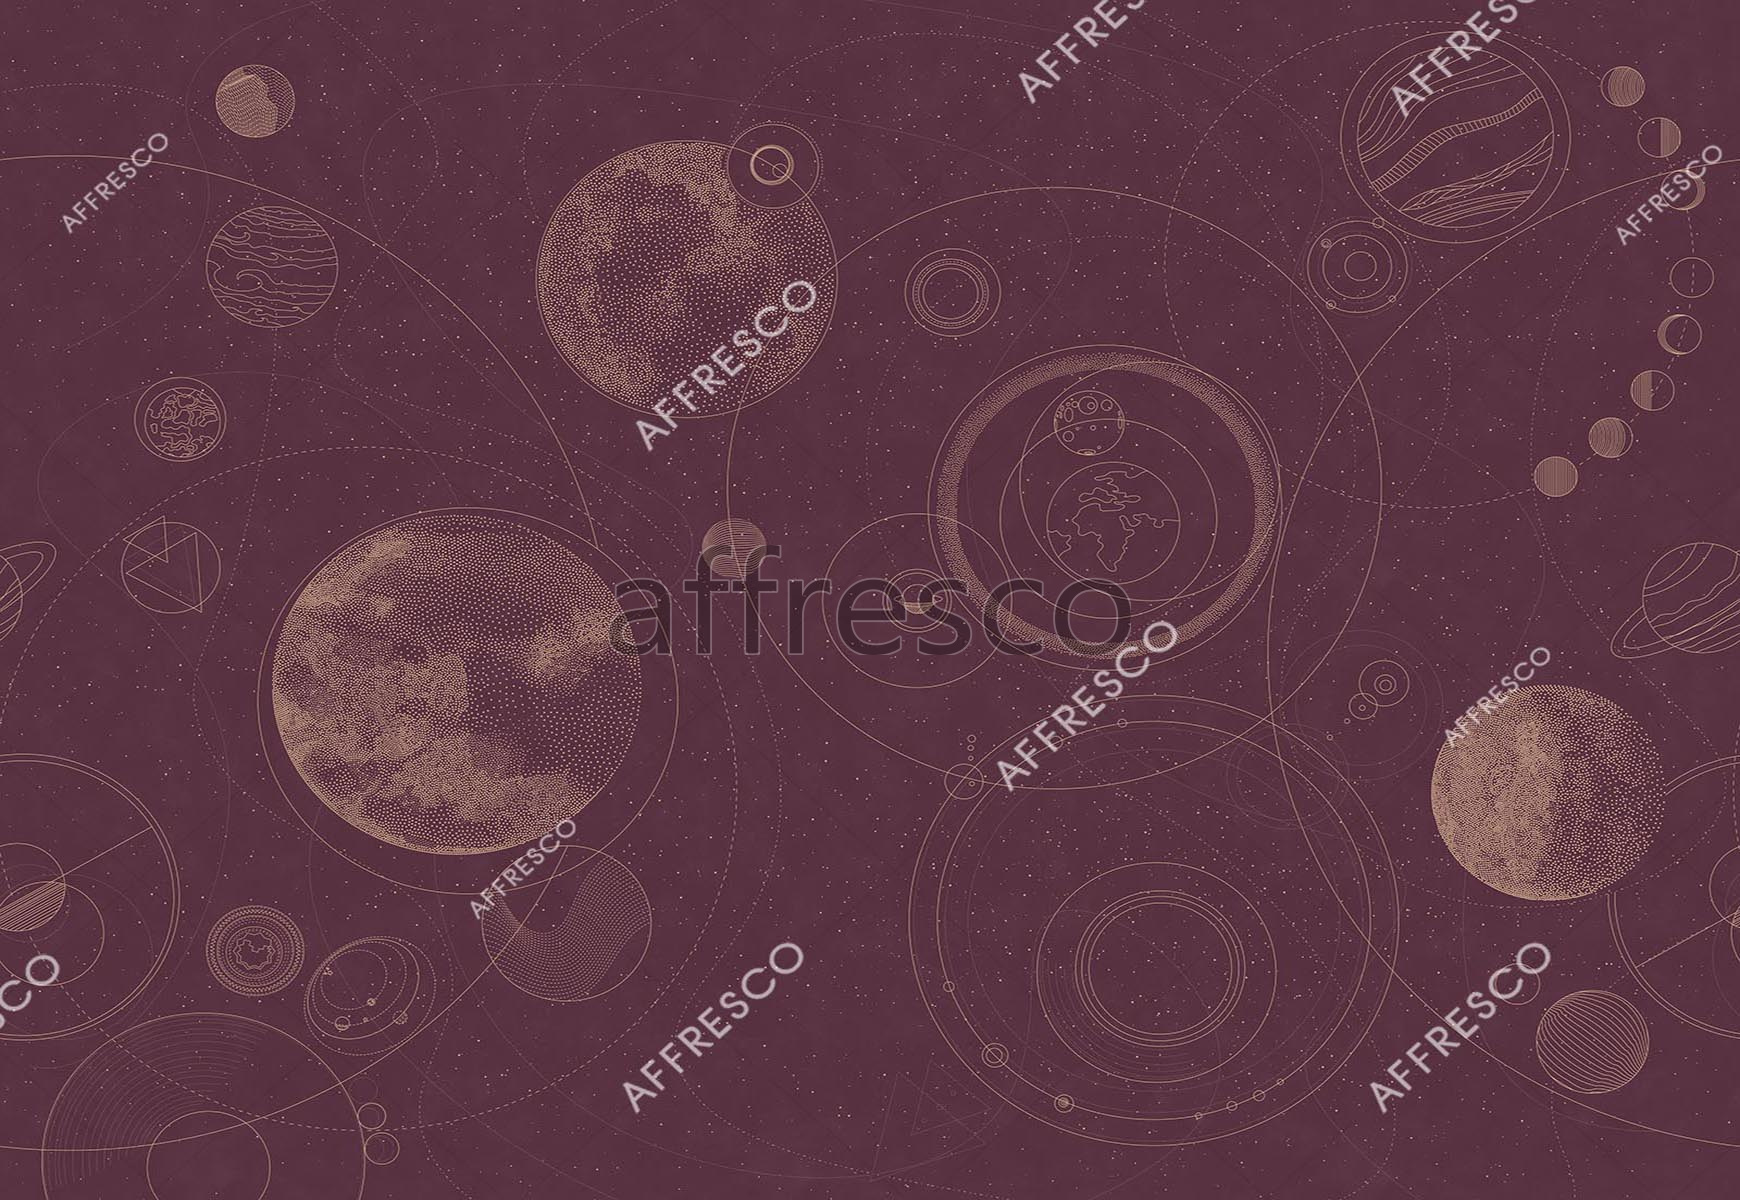 ID139195 | Geometry | Attractive space | Affresco Factory